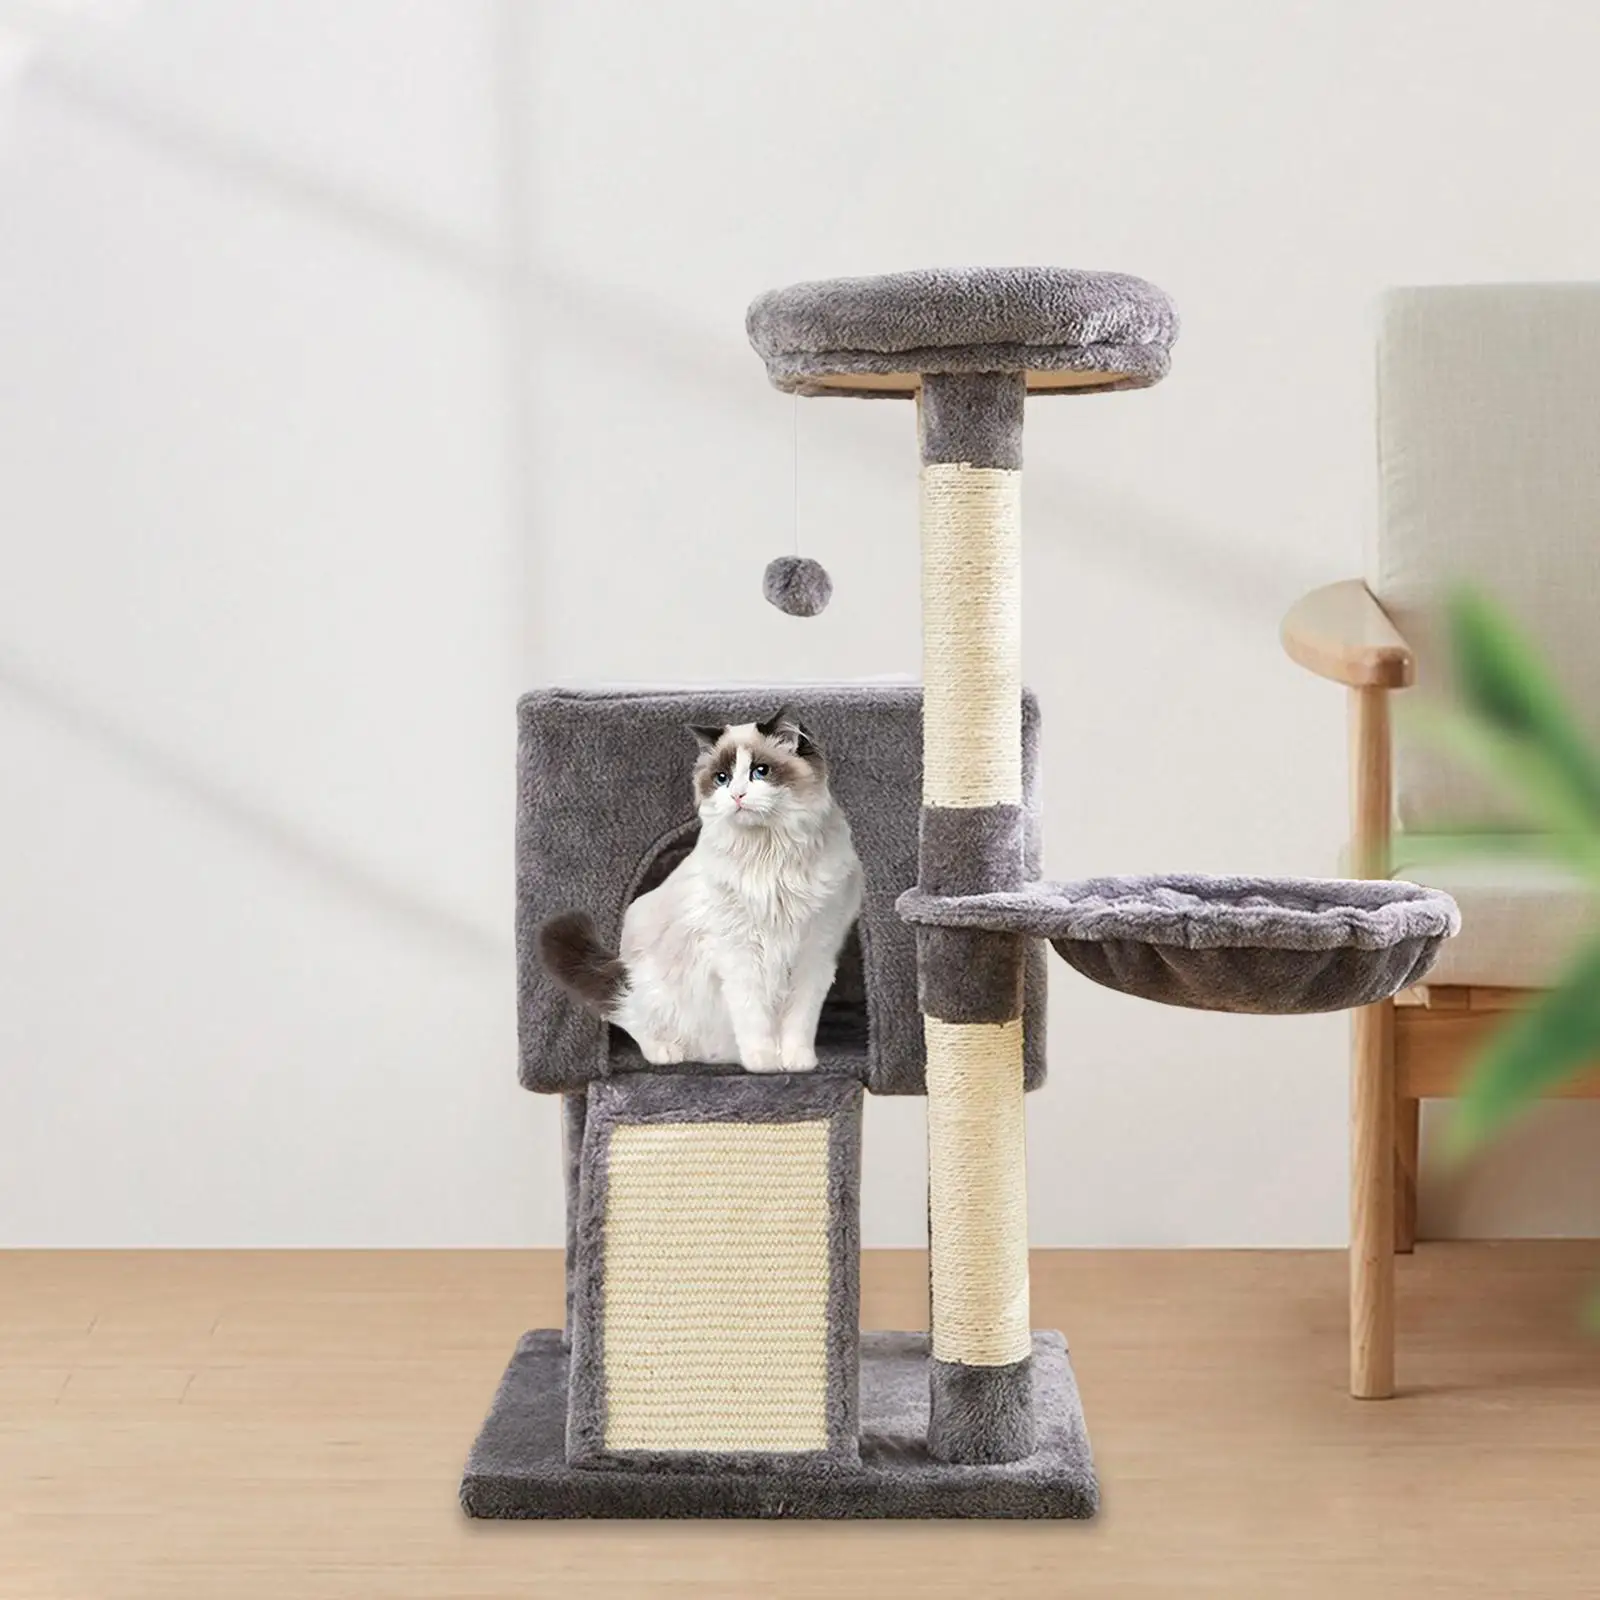 with Scratching Posts Climbing Stand Perch Sofa Protector Platform Ladder Sisal Rope Activity Center Condo